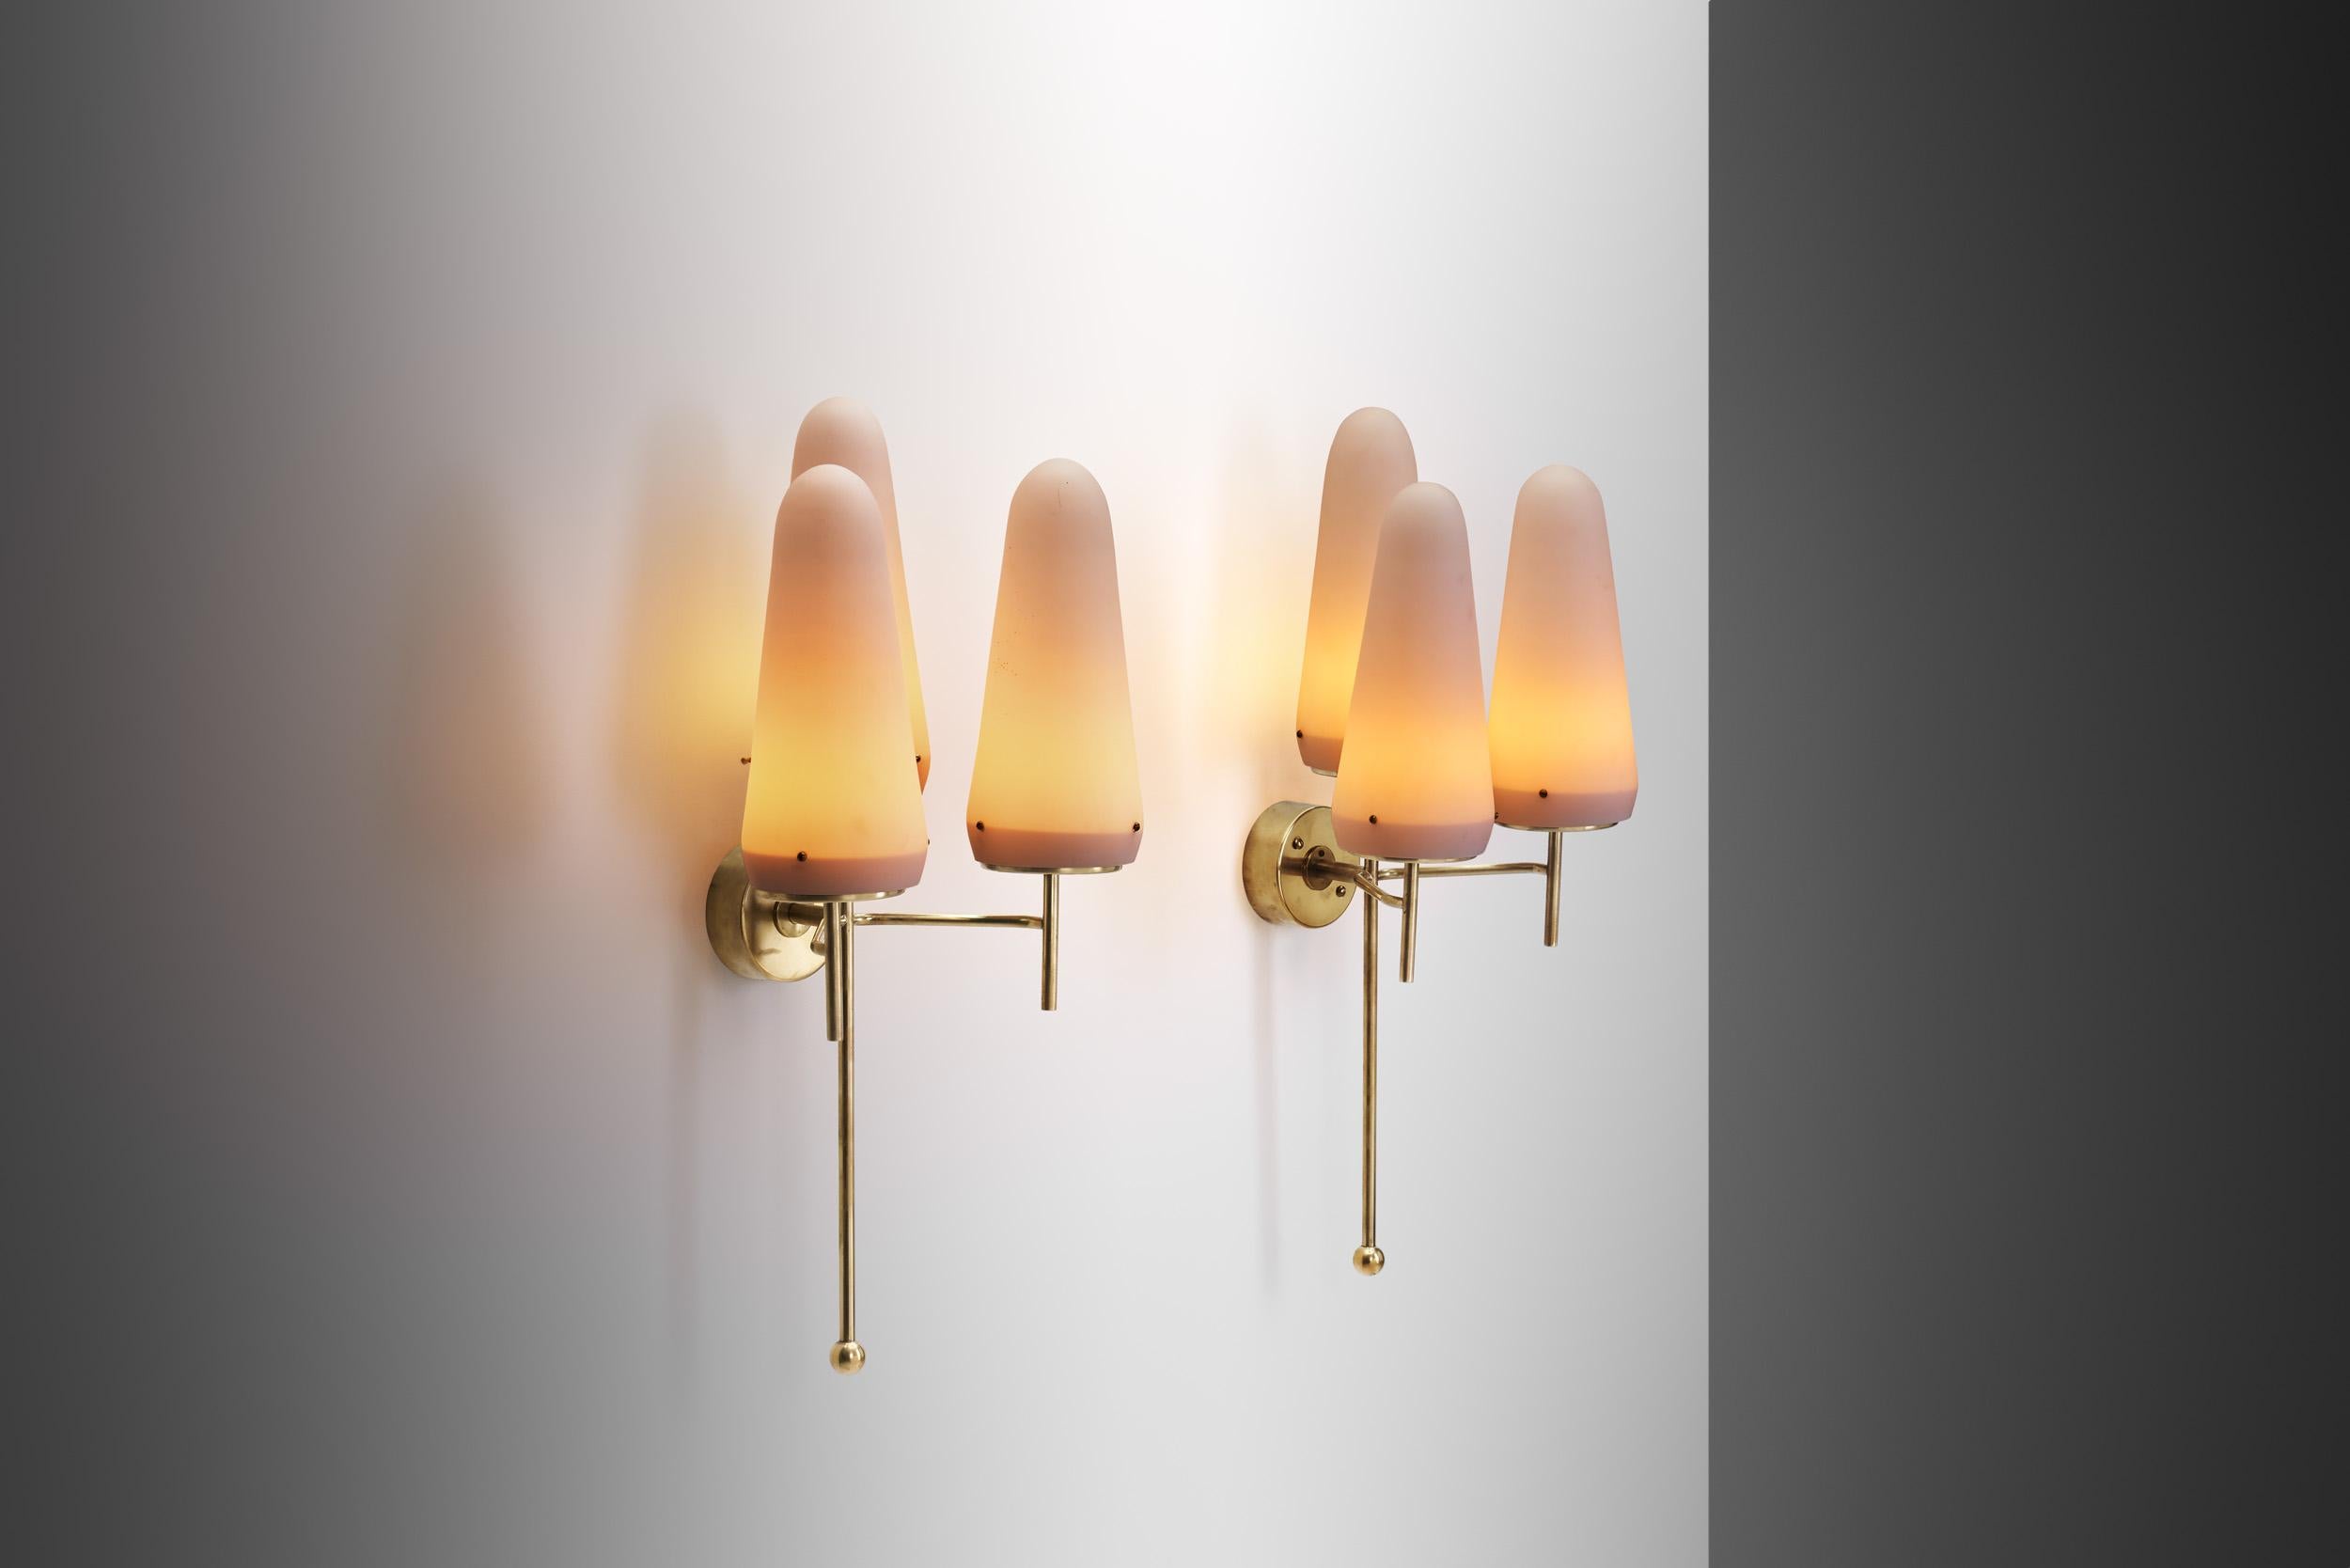 Mid-20th Century Hans Agne Jakobsson Brass and Glass Wall Sconces for AB Markaryd, Sweden 1950s For Sale